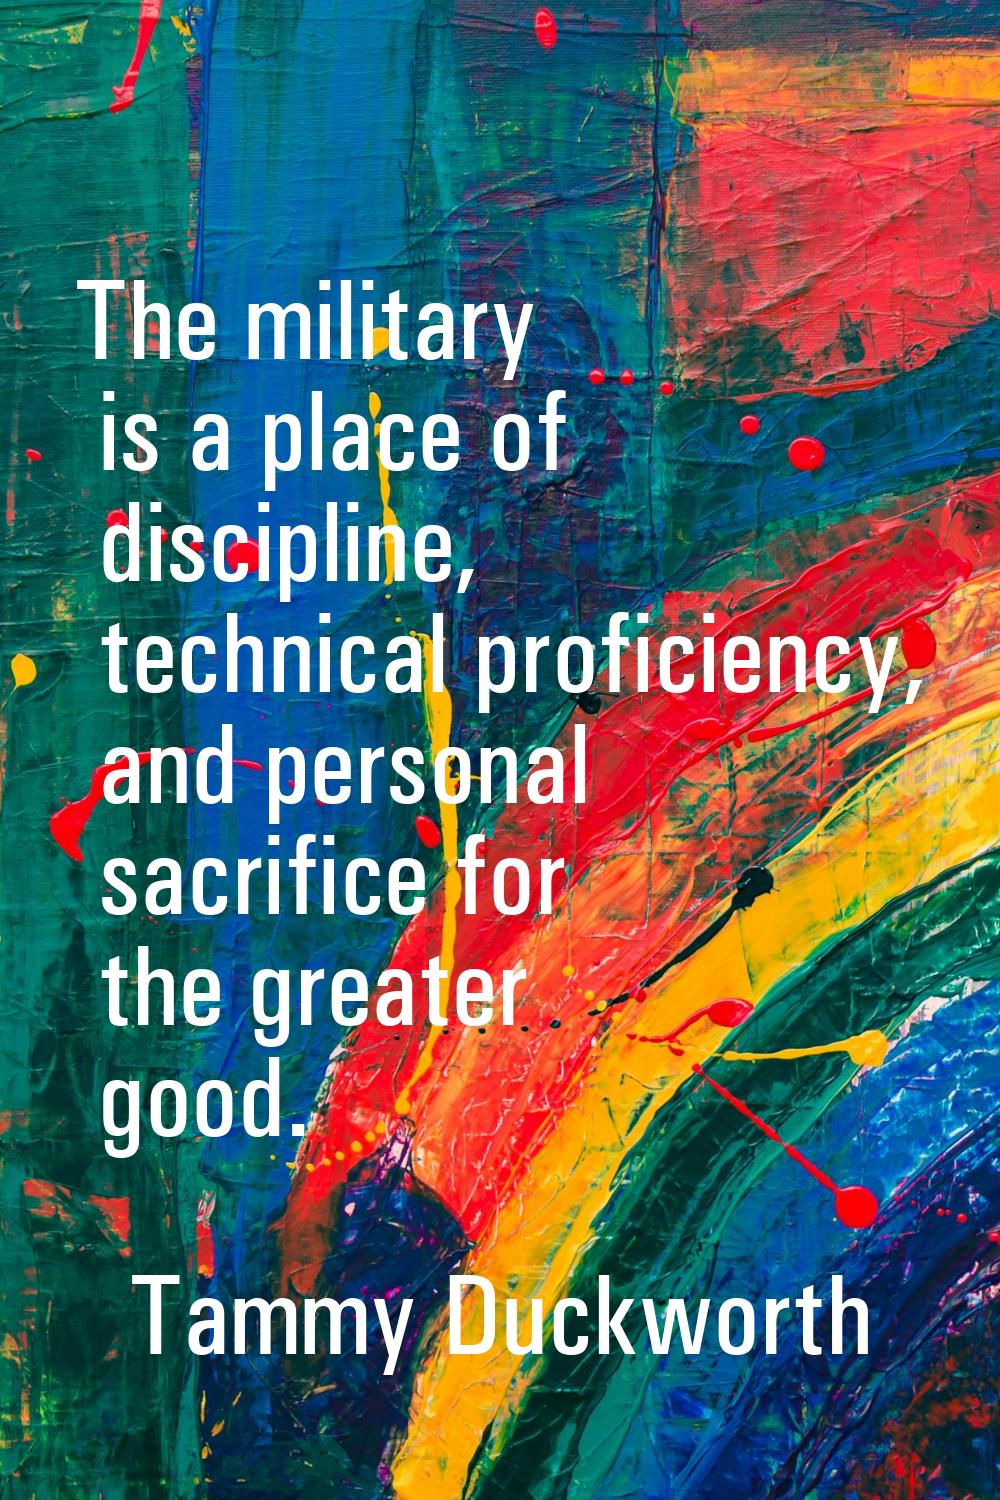 The military is a place of discipline, technical proficiency, and personal sacrifice for the greate